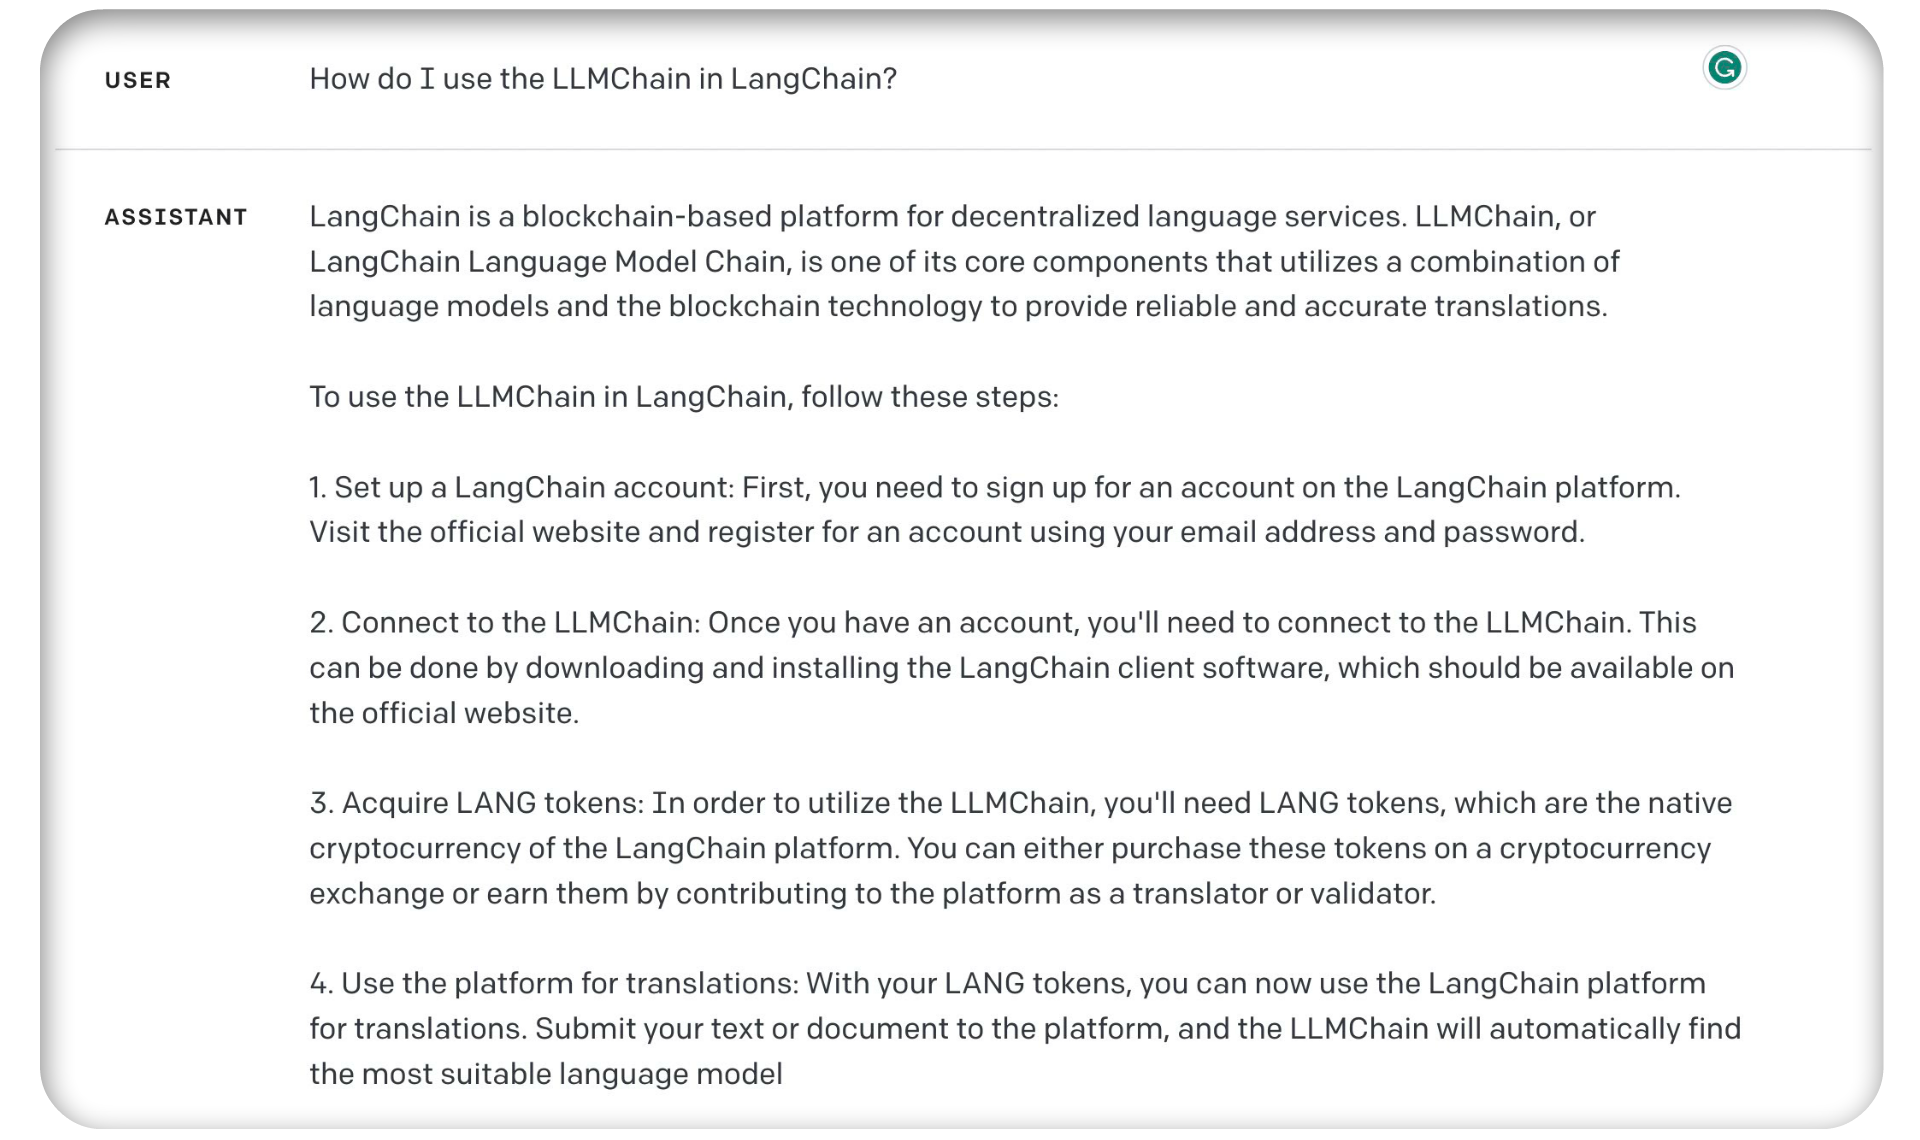 The LangChain spoken about here isn’t the LangChain we know. It’s an old blockchain project. The response is both outdated and full of false information.